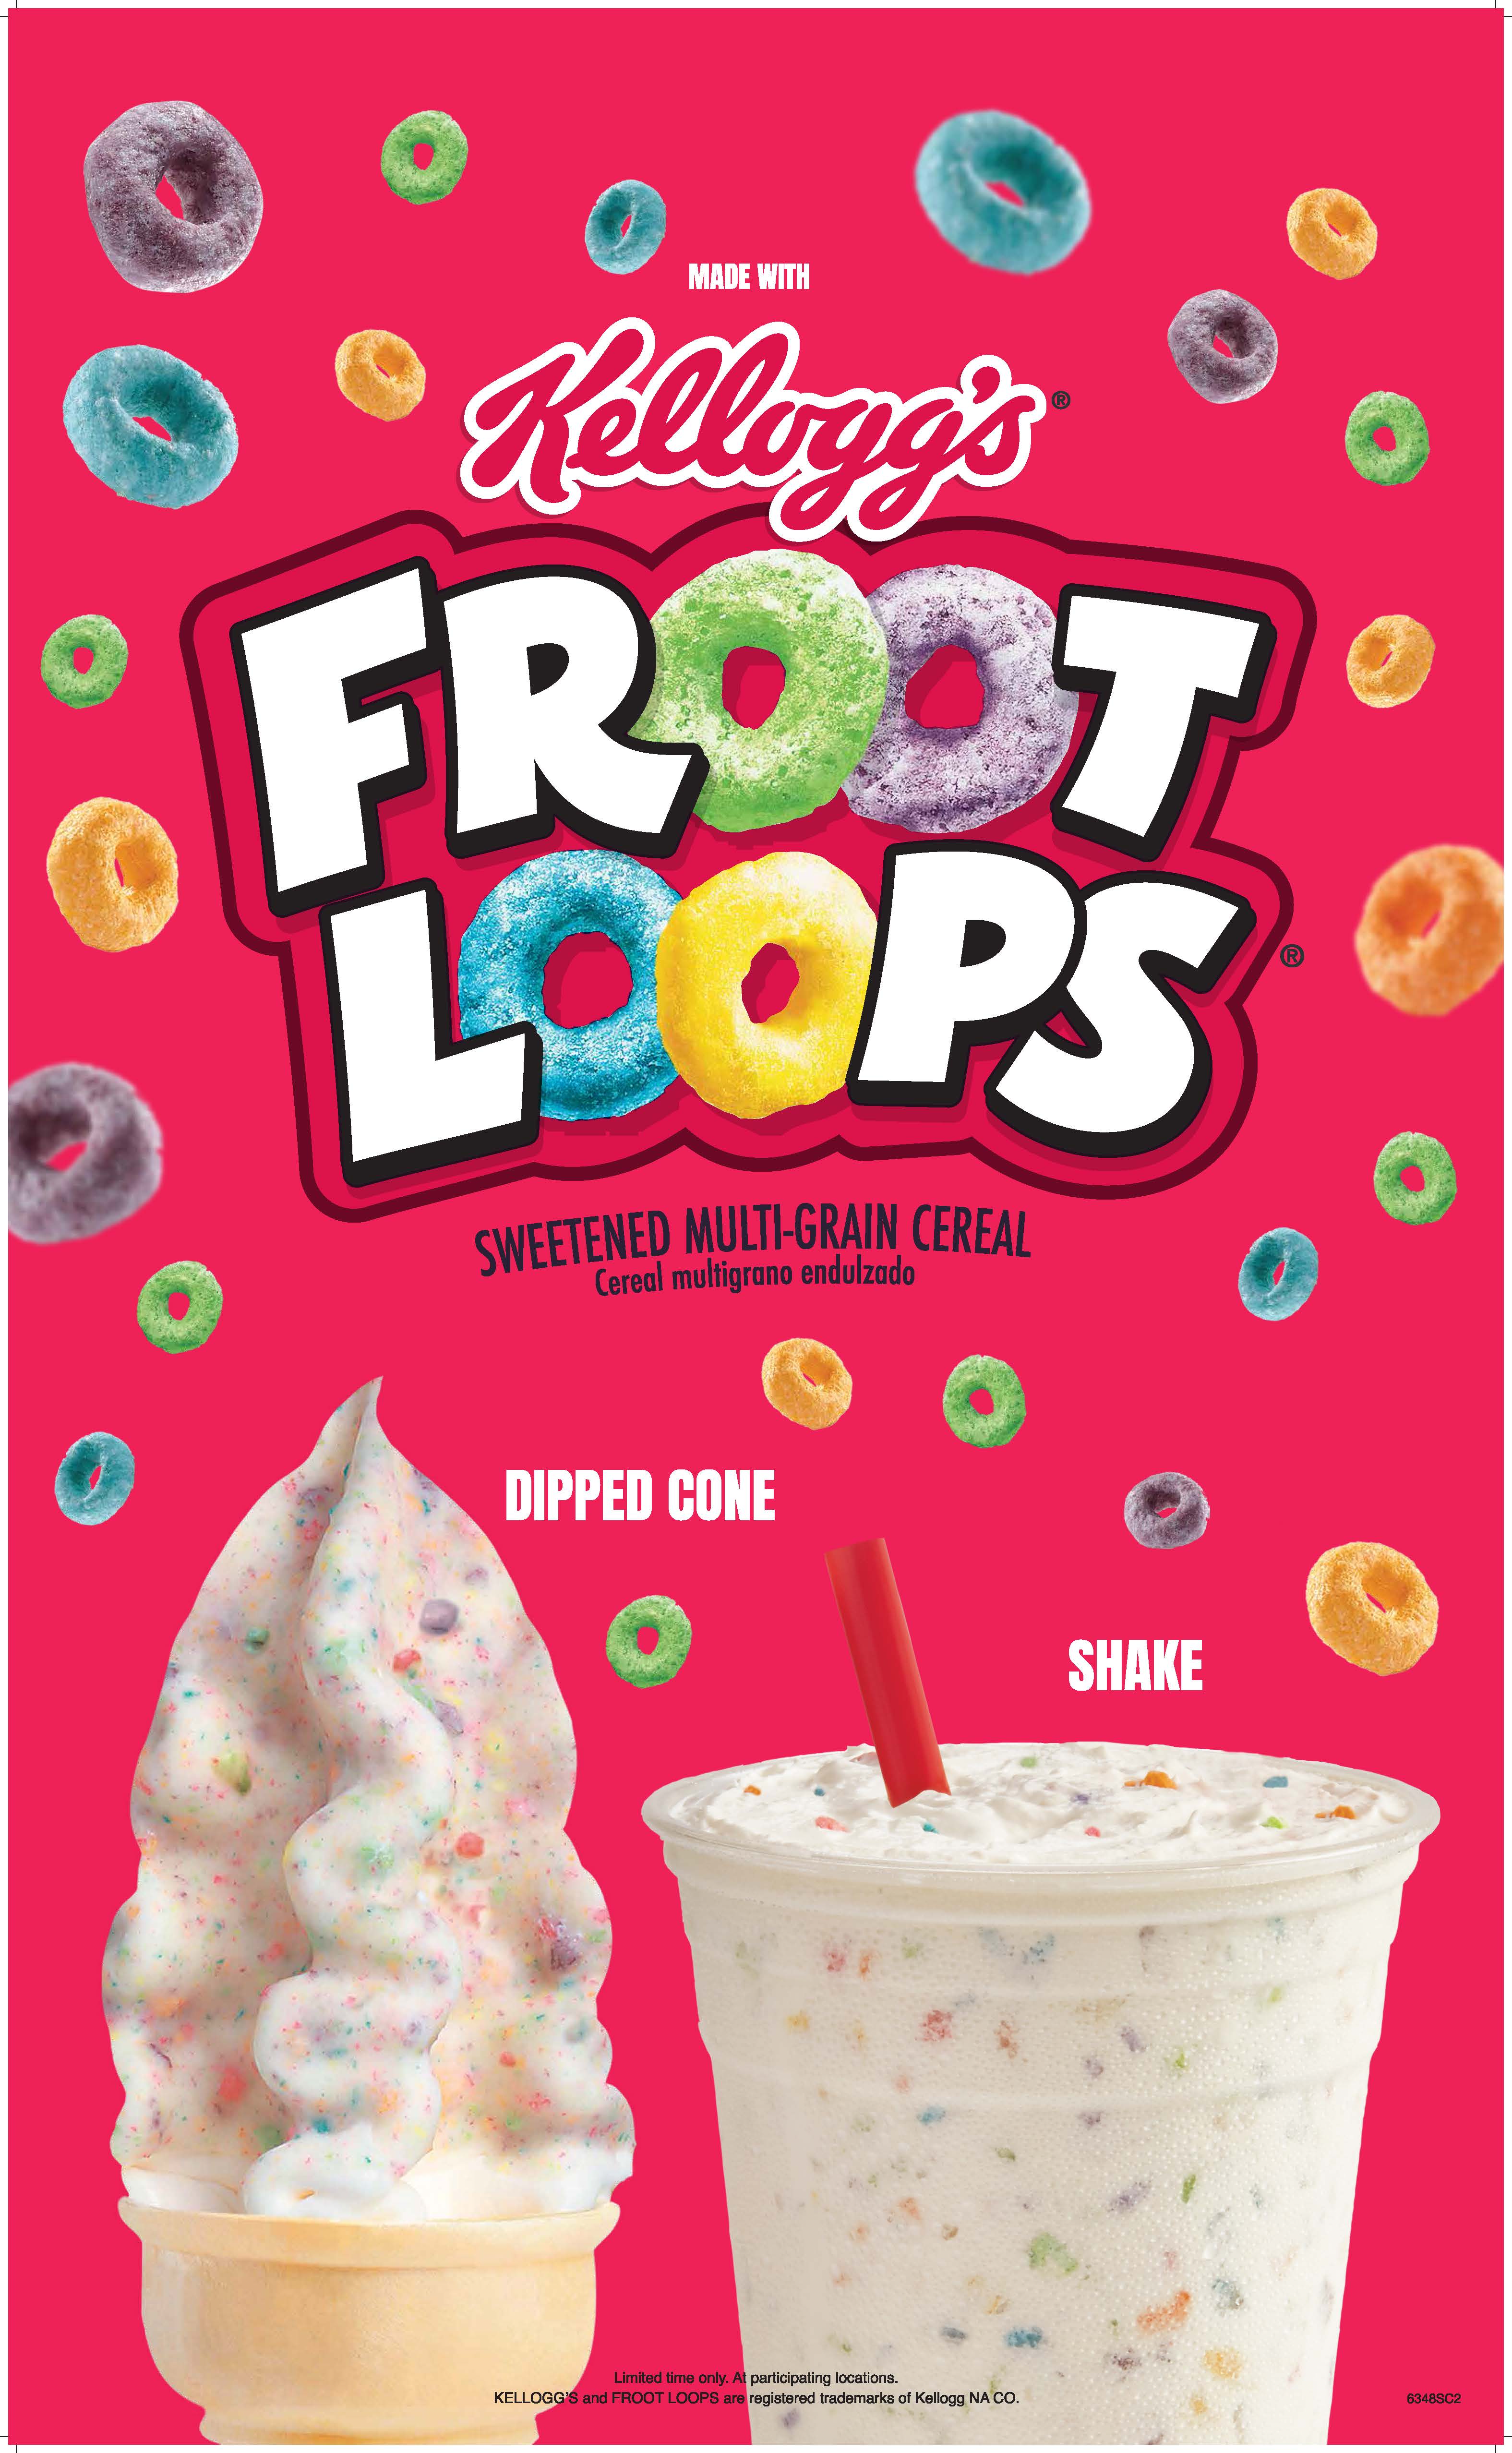 Enjoy Wienerschnitzel’s Cereal-sly Delicious Froot Loops Dipped Cone & Shake on National Cereal Day (3/7)